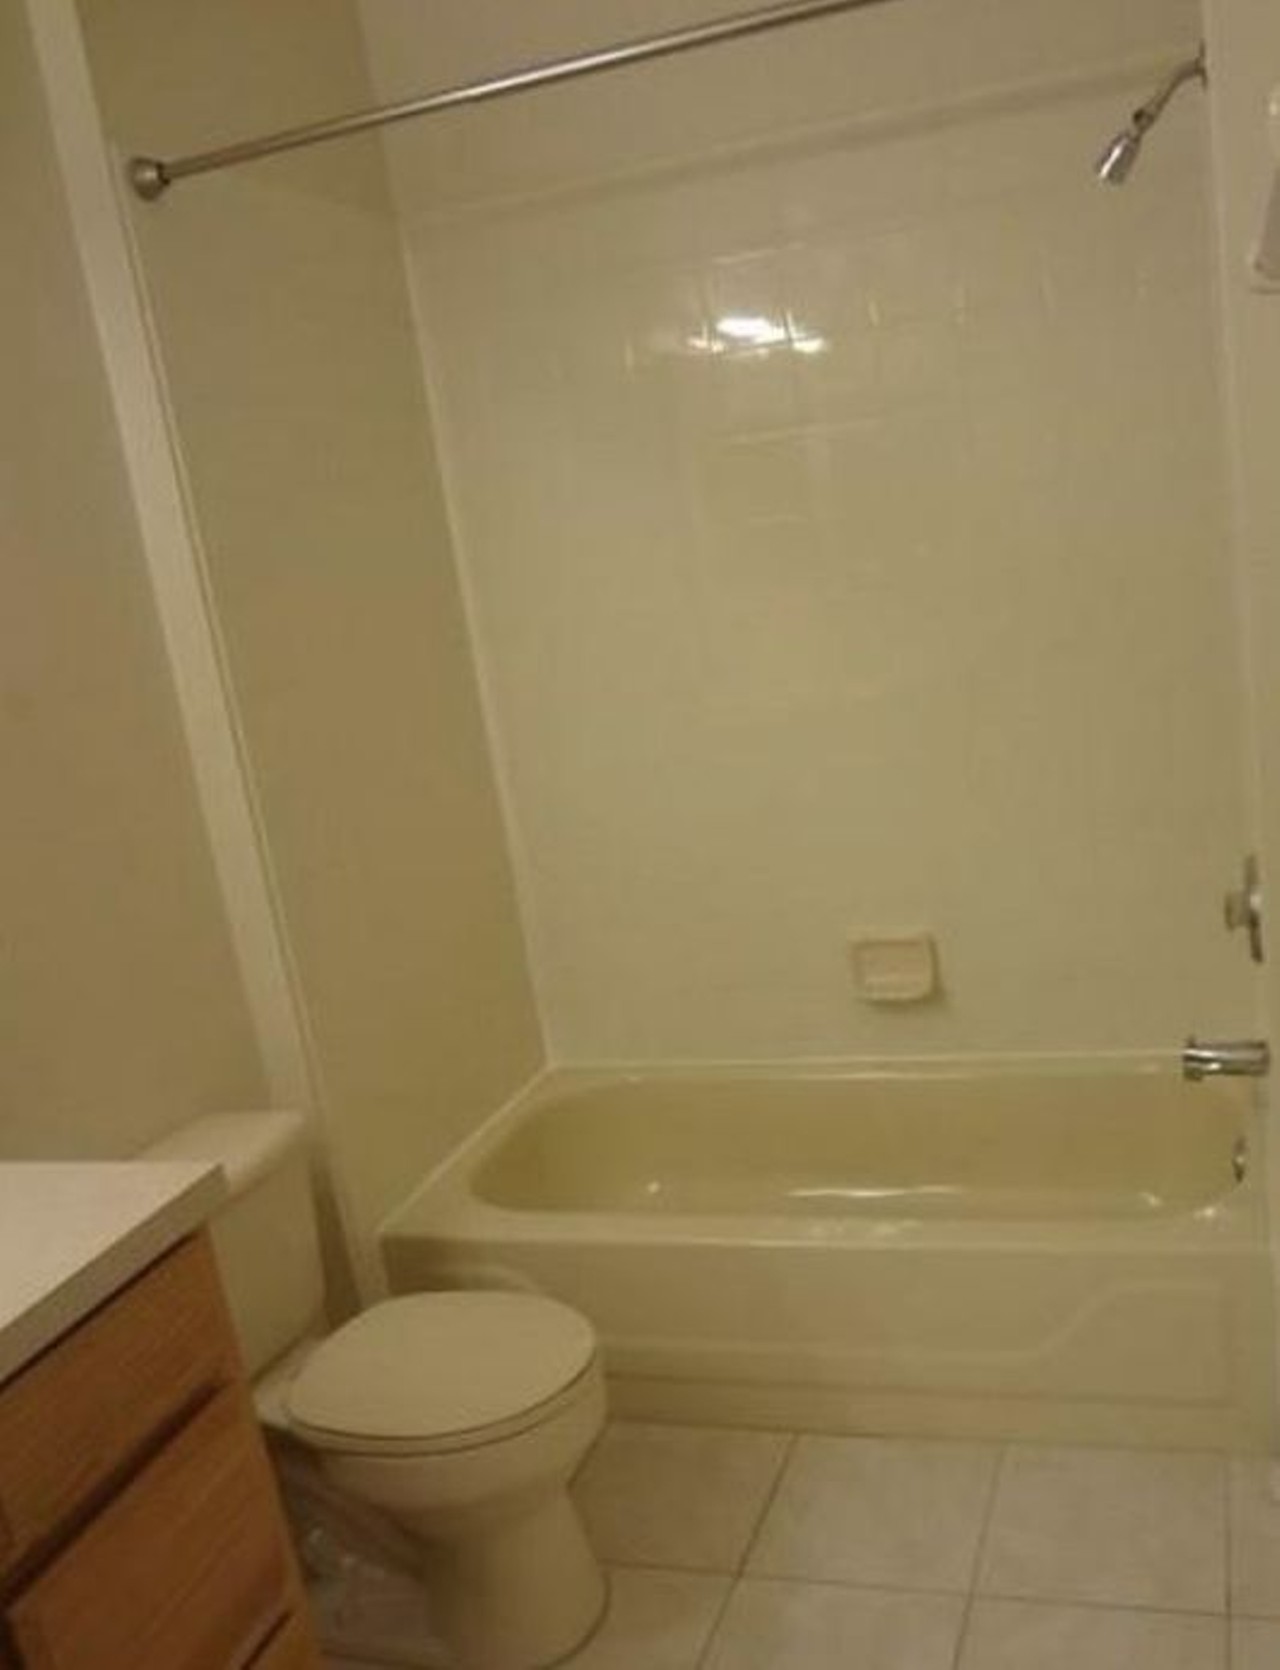 7123 Yacht Basin Ave, Orlando
$1,250/mo
2 bed, 2 bath, 1,050 sqft
It isn't a fancy bathroom, but there is a tub for when you need a soak.